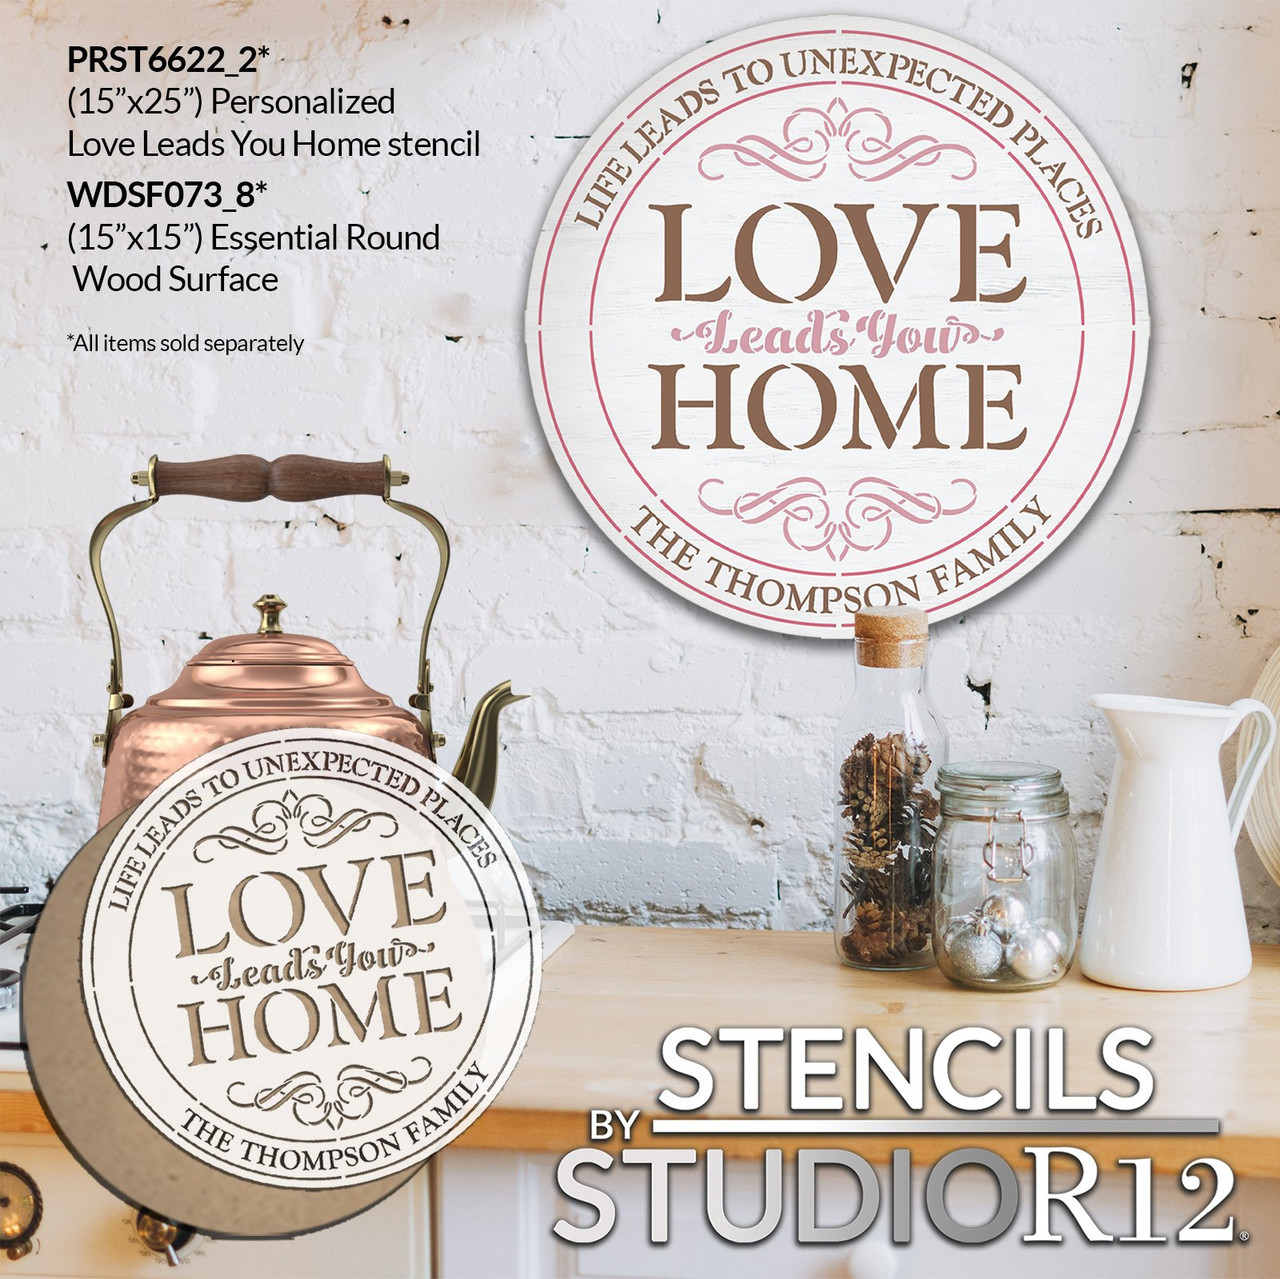 Personalized Love Leads You Home Stencil by StudioR12 - Select Size - USA Made - Craft DIY Farmhouse Home Decor | Paint Custom Wood Sign for Living Room | Reusable Mylar Template